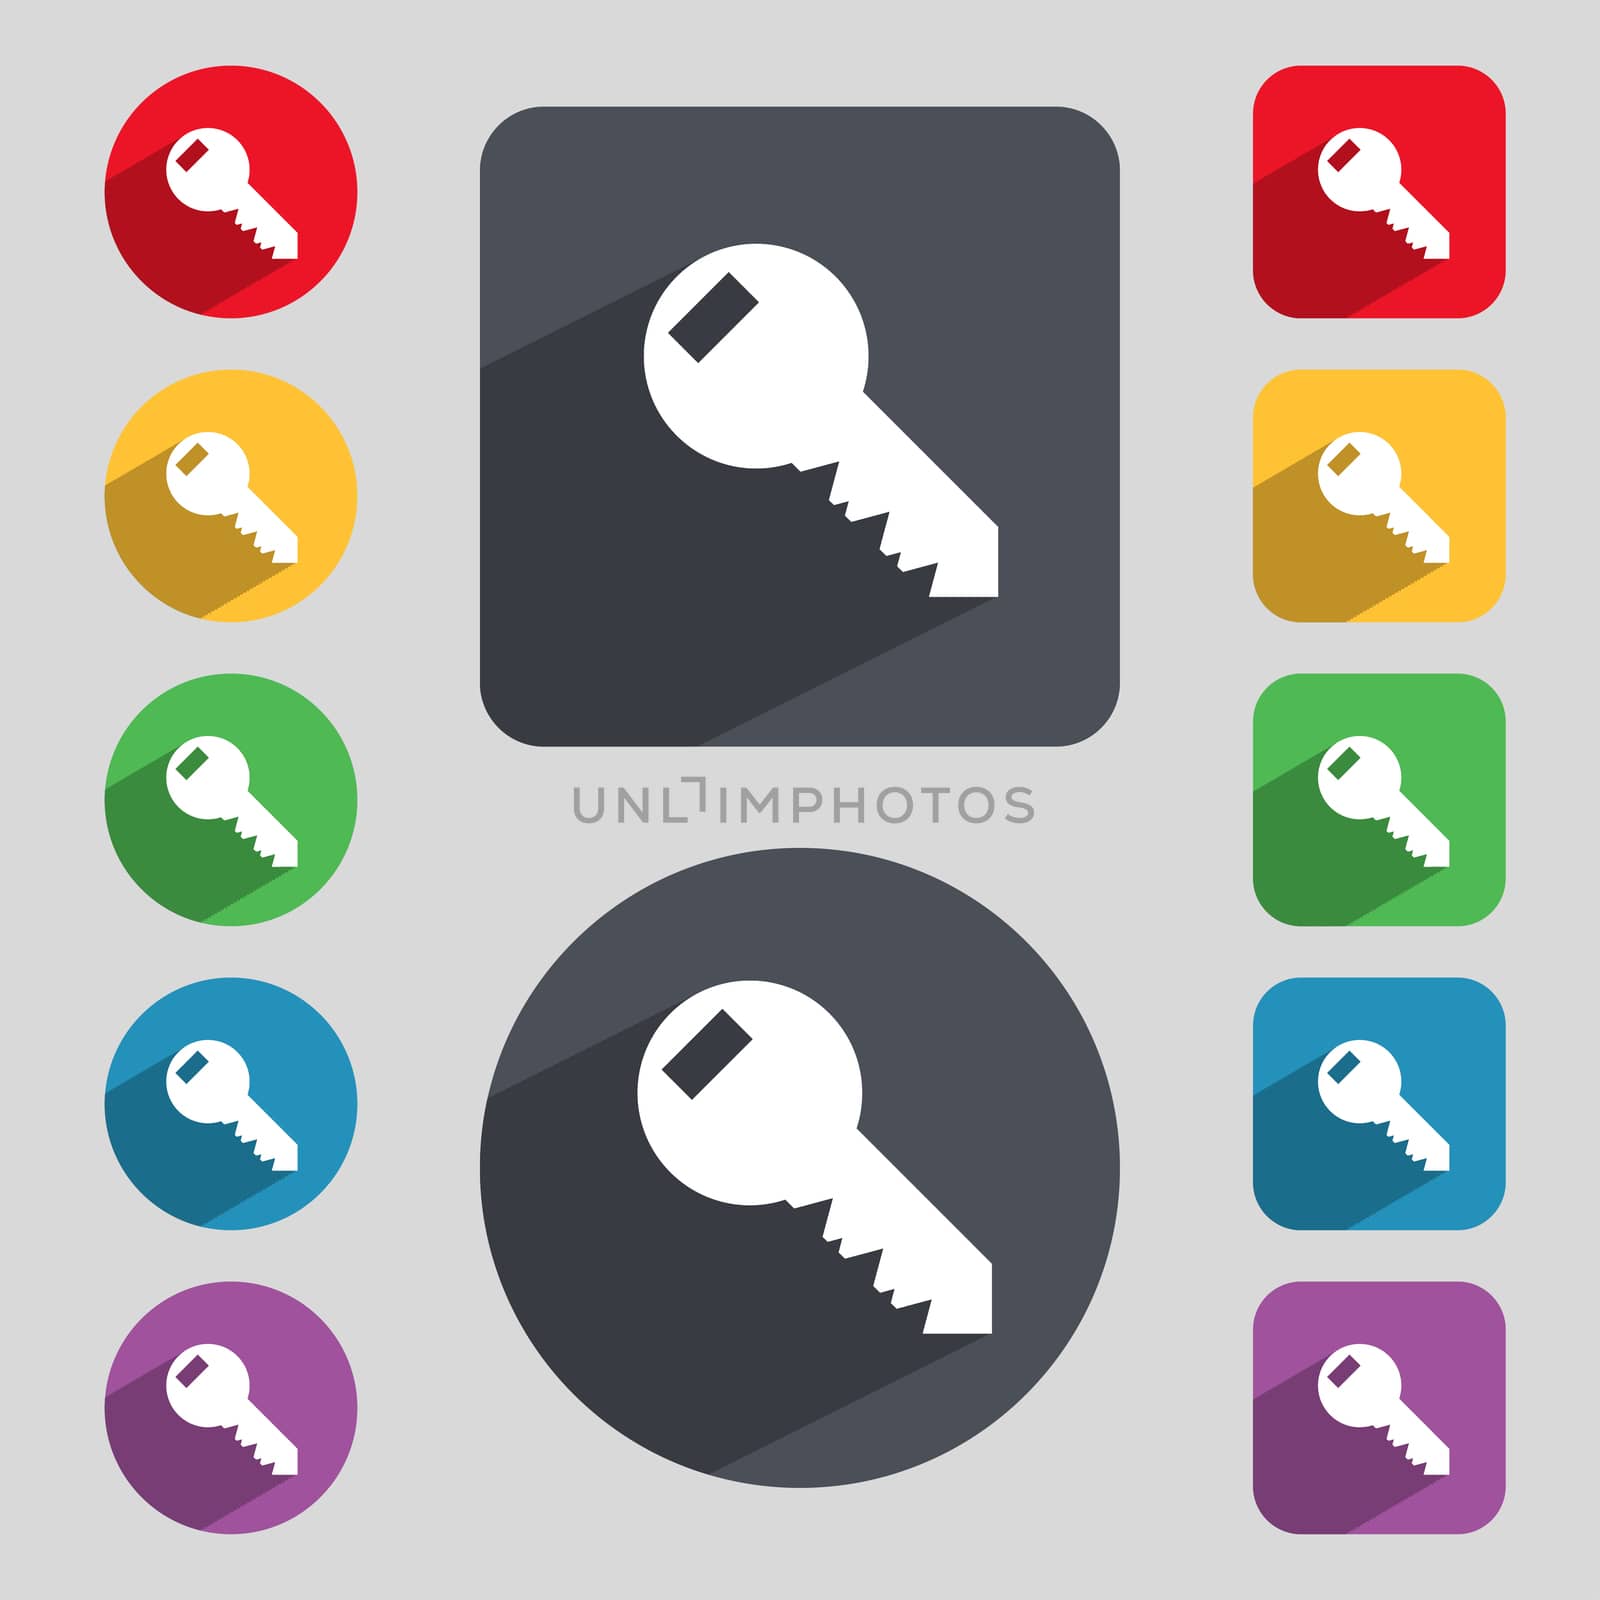 Key sign icon. Unlock tool symbol. Set of colored buttons. illustration